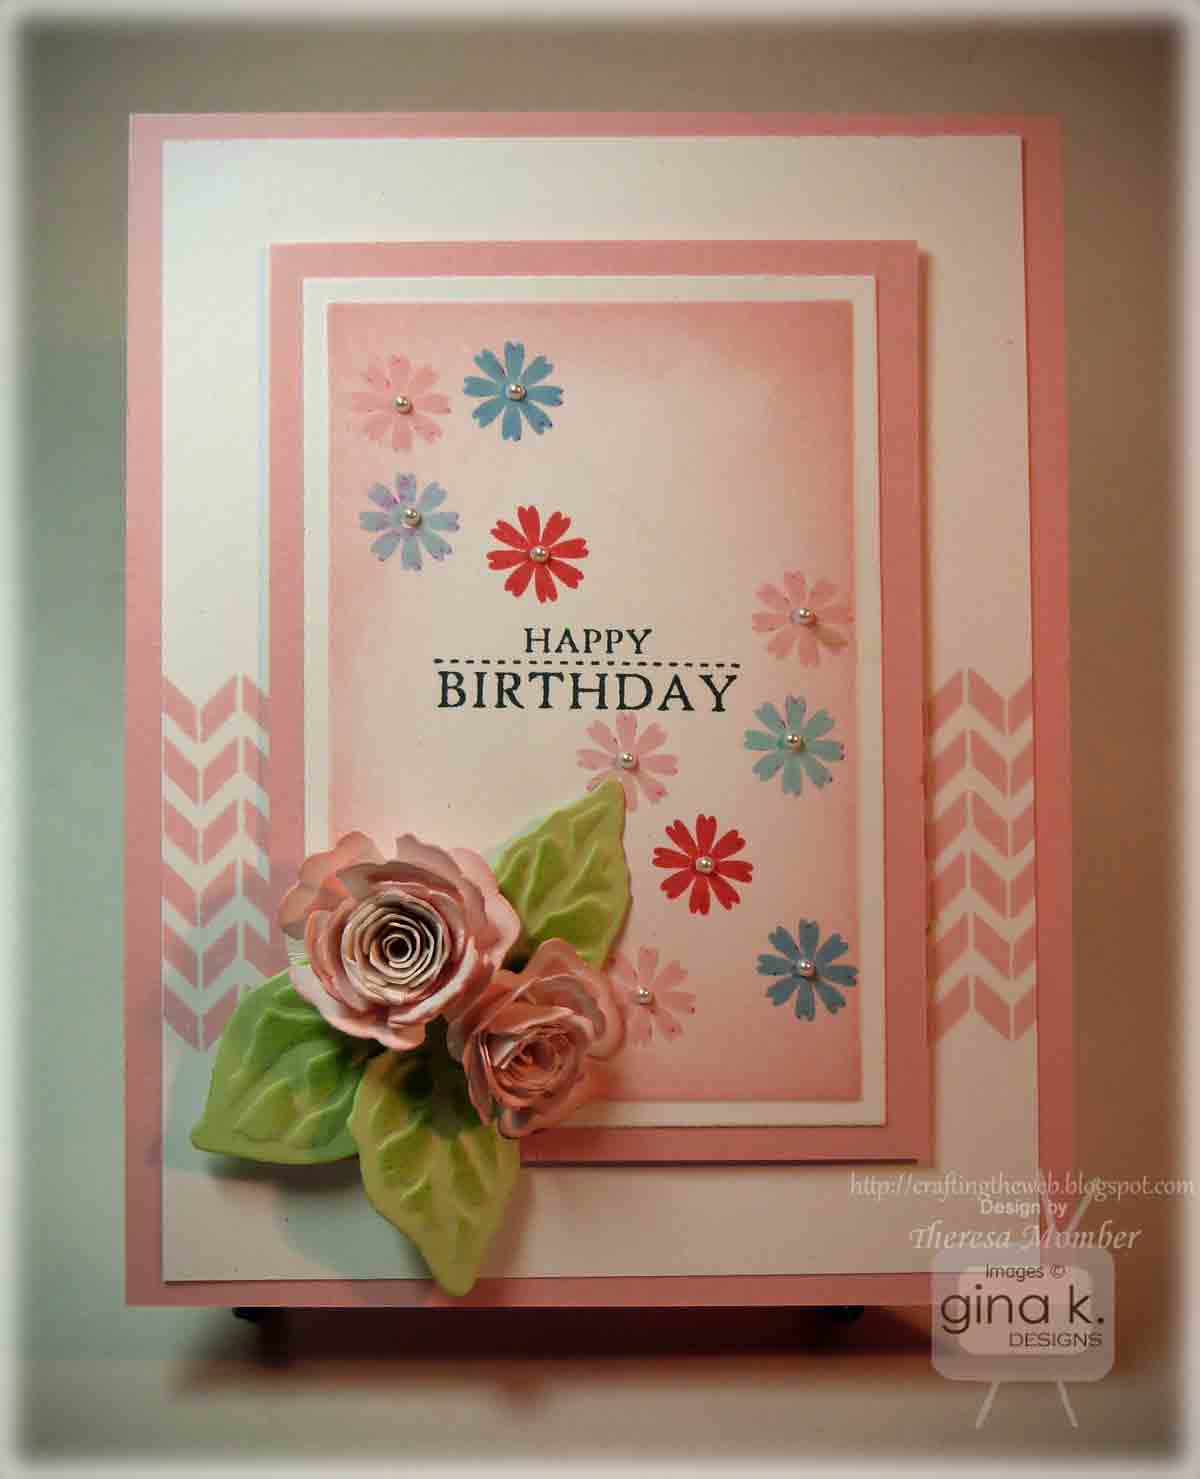 Crafting The Web: Floral Birthday Card Tutorial